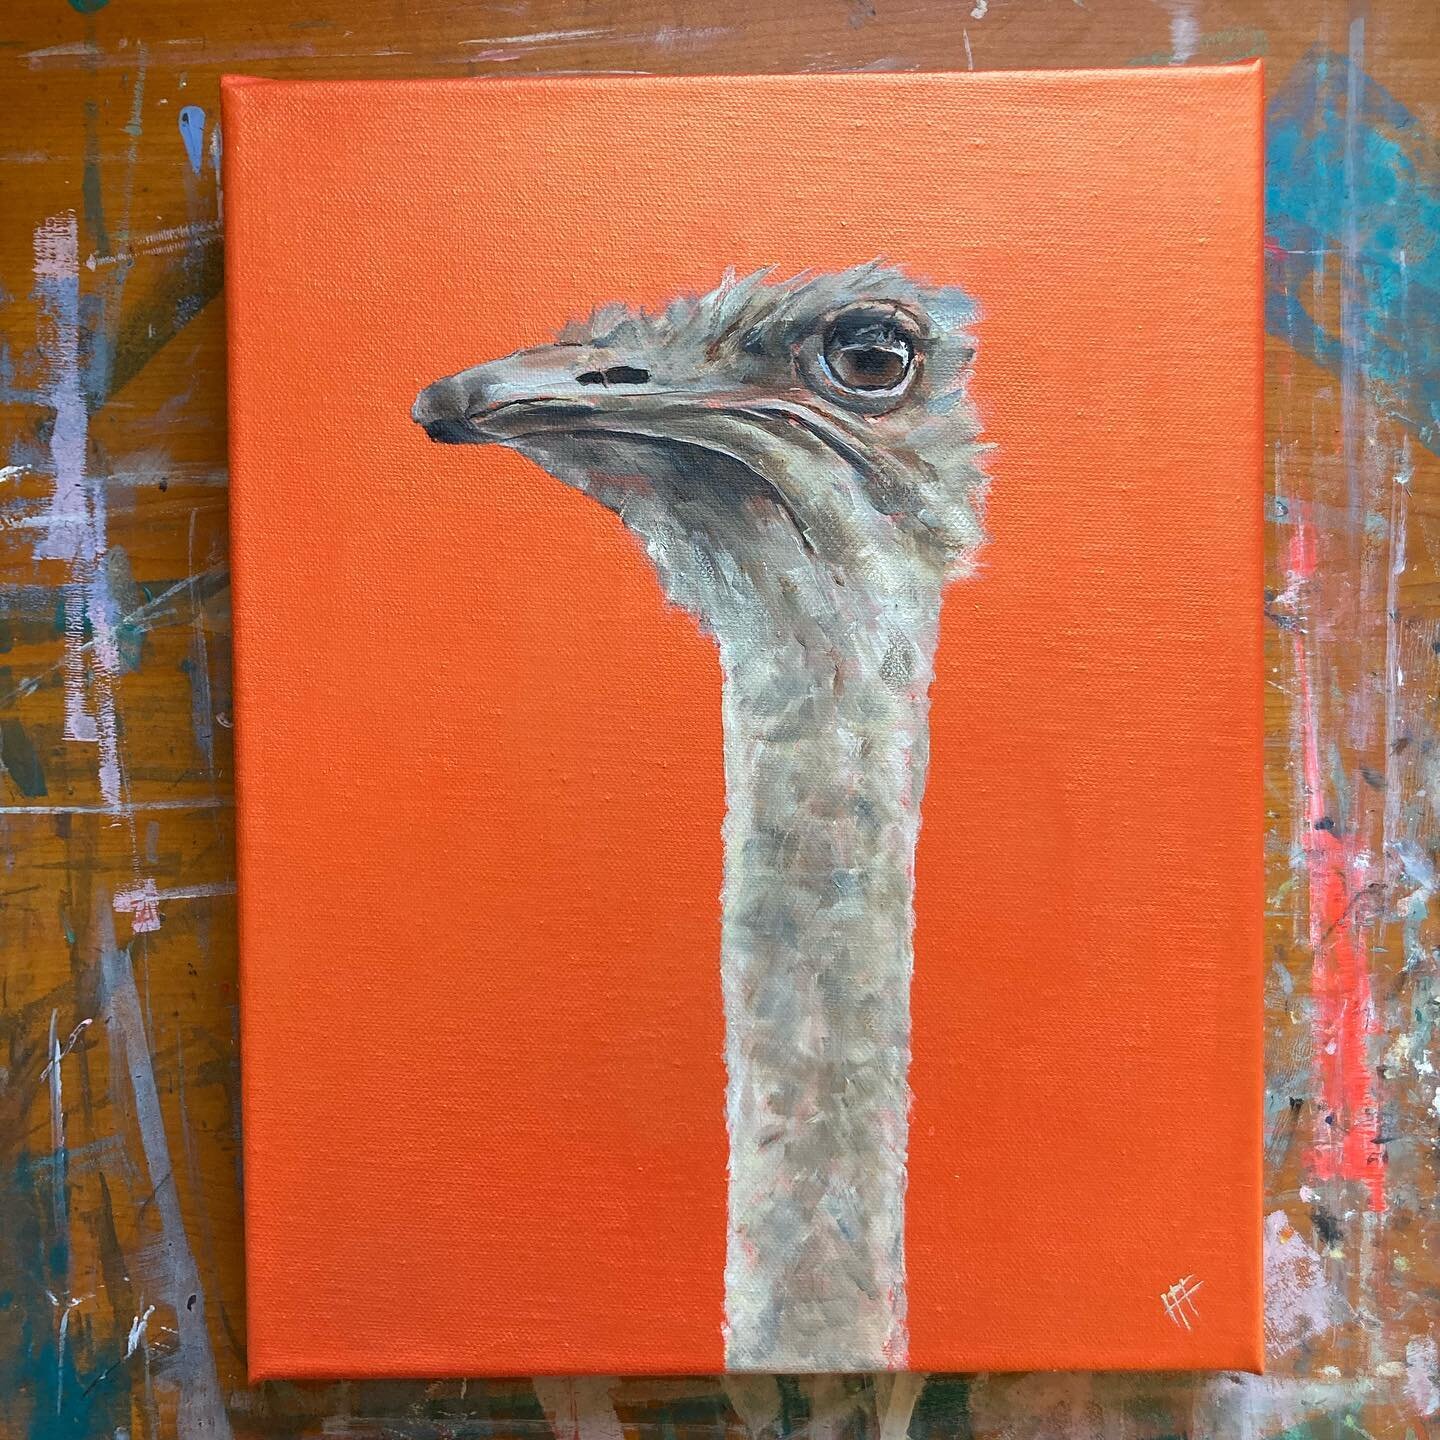 Introducing Oswald the very orange ostrich&hellip; 🧡

A similar piece was snapped up by an art buyer at my exhibition in July and now this ostrich is looking for its forever home. To be framed shortly but full details are on the Originals Shop page 